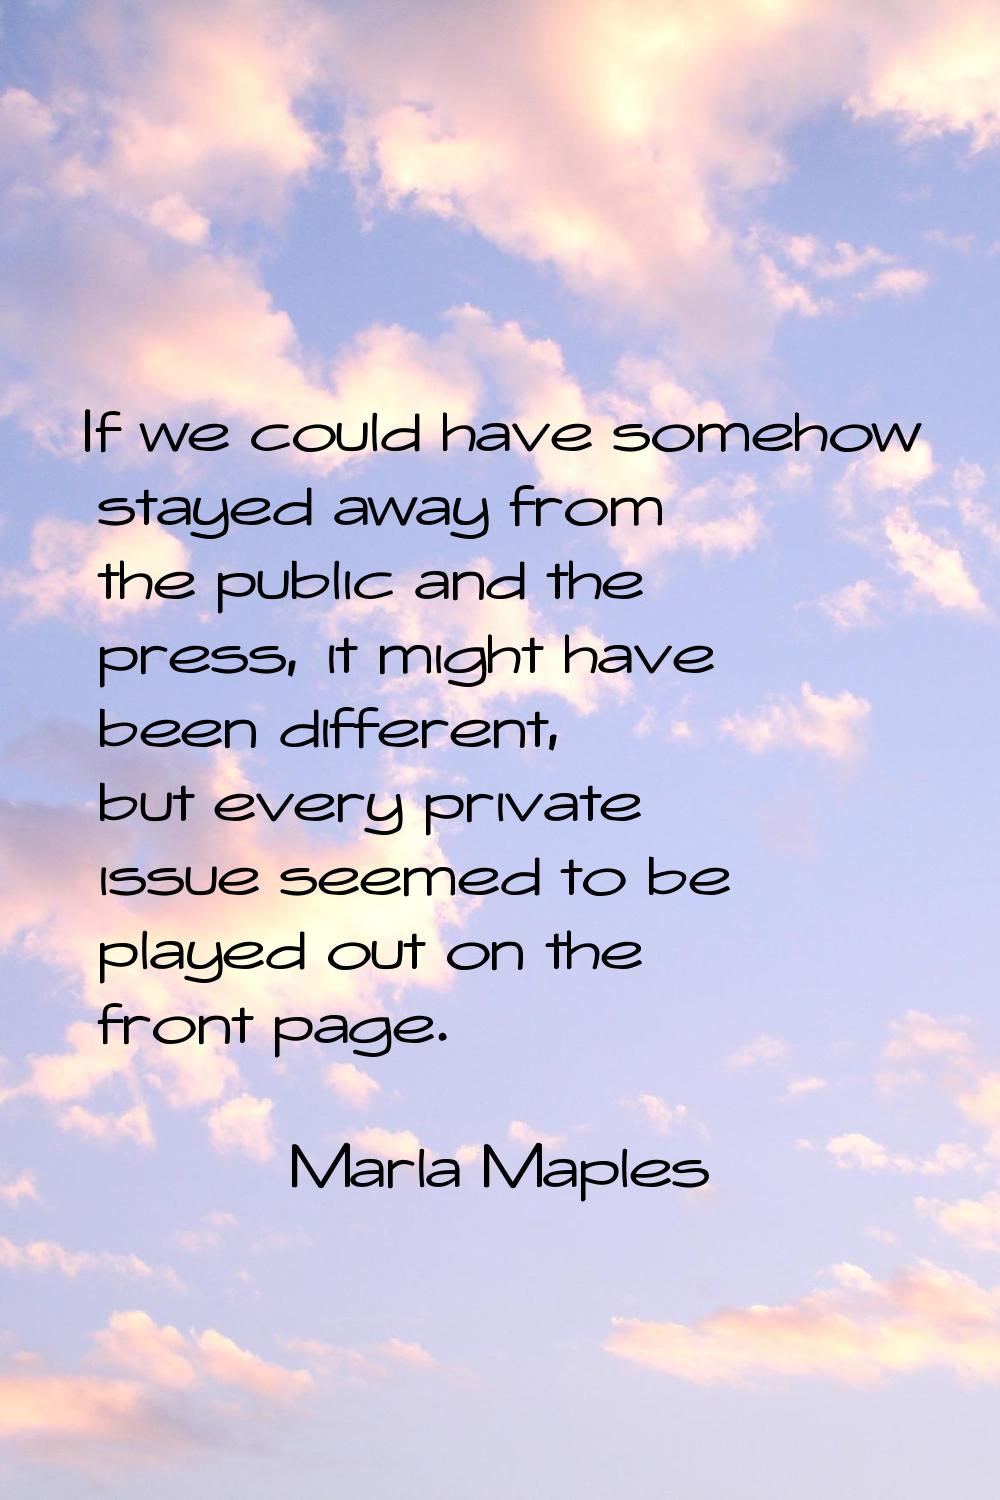 If we could have somehow stayed away from the public and the press, it might have been different, b